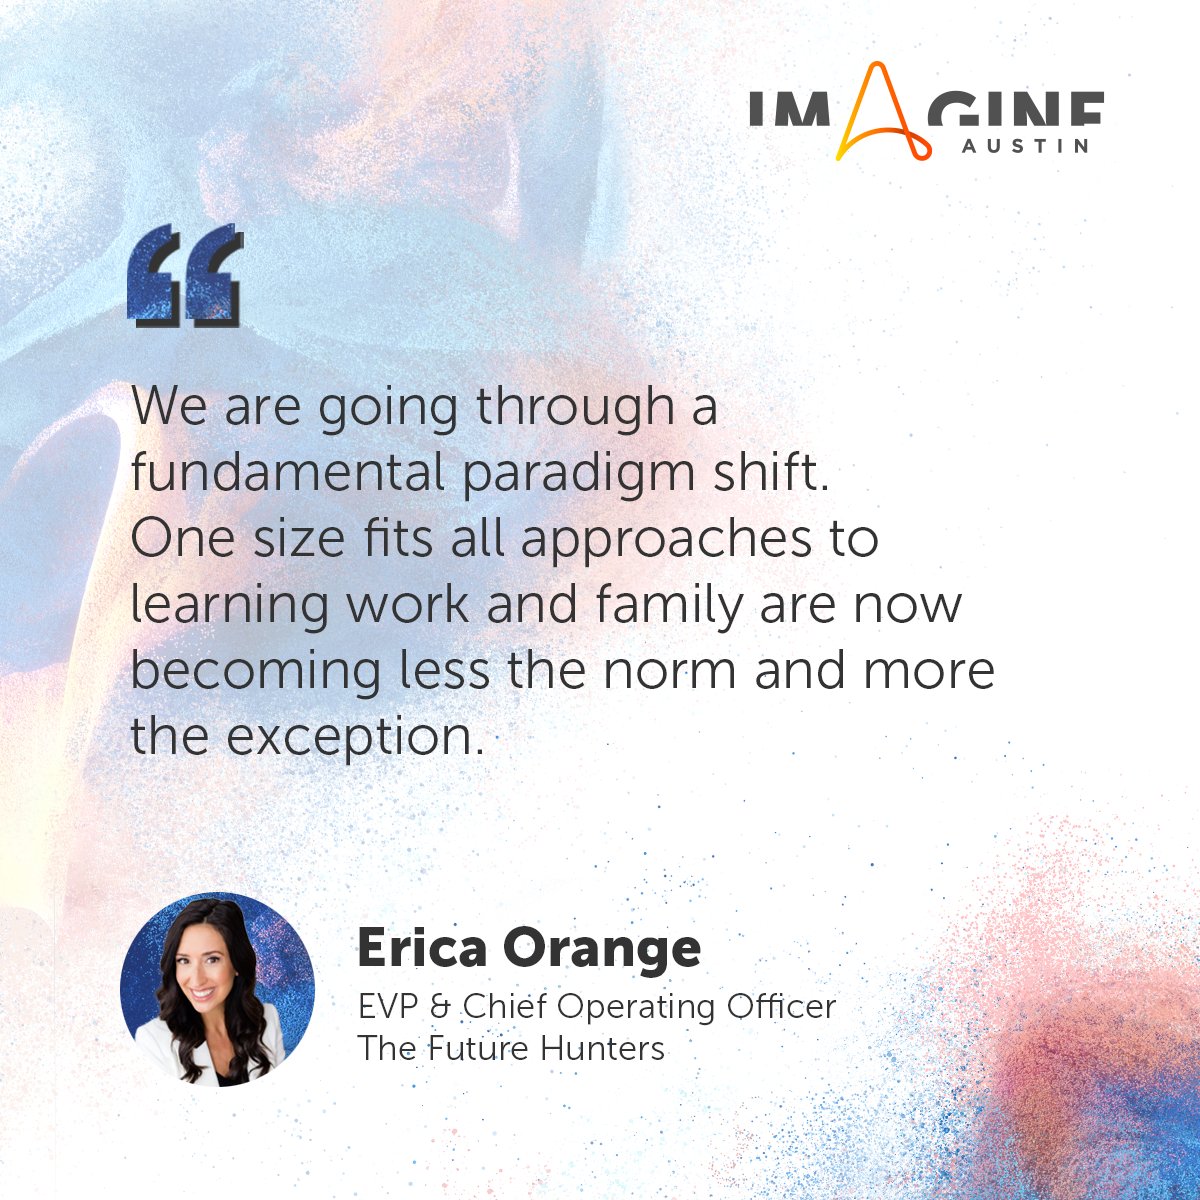 Erica Orange, EVP & COO, The Future Hunters, takes a look at how our perspectives of work & time have changed. We are seeing the rise of blended “neohumanic” work. Its acceleration will lead to a shift in the ways of working. #Imagine2023